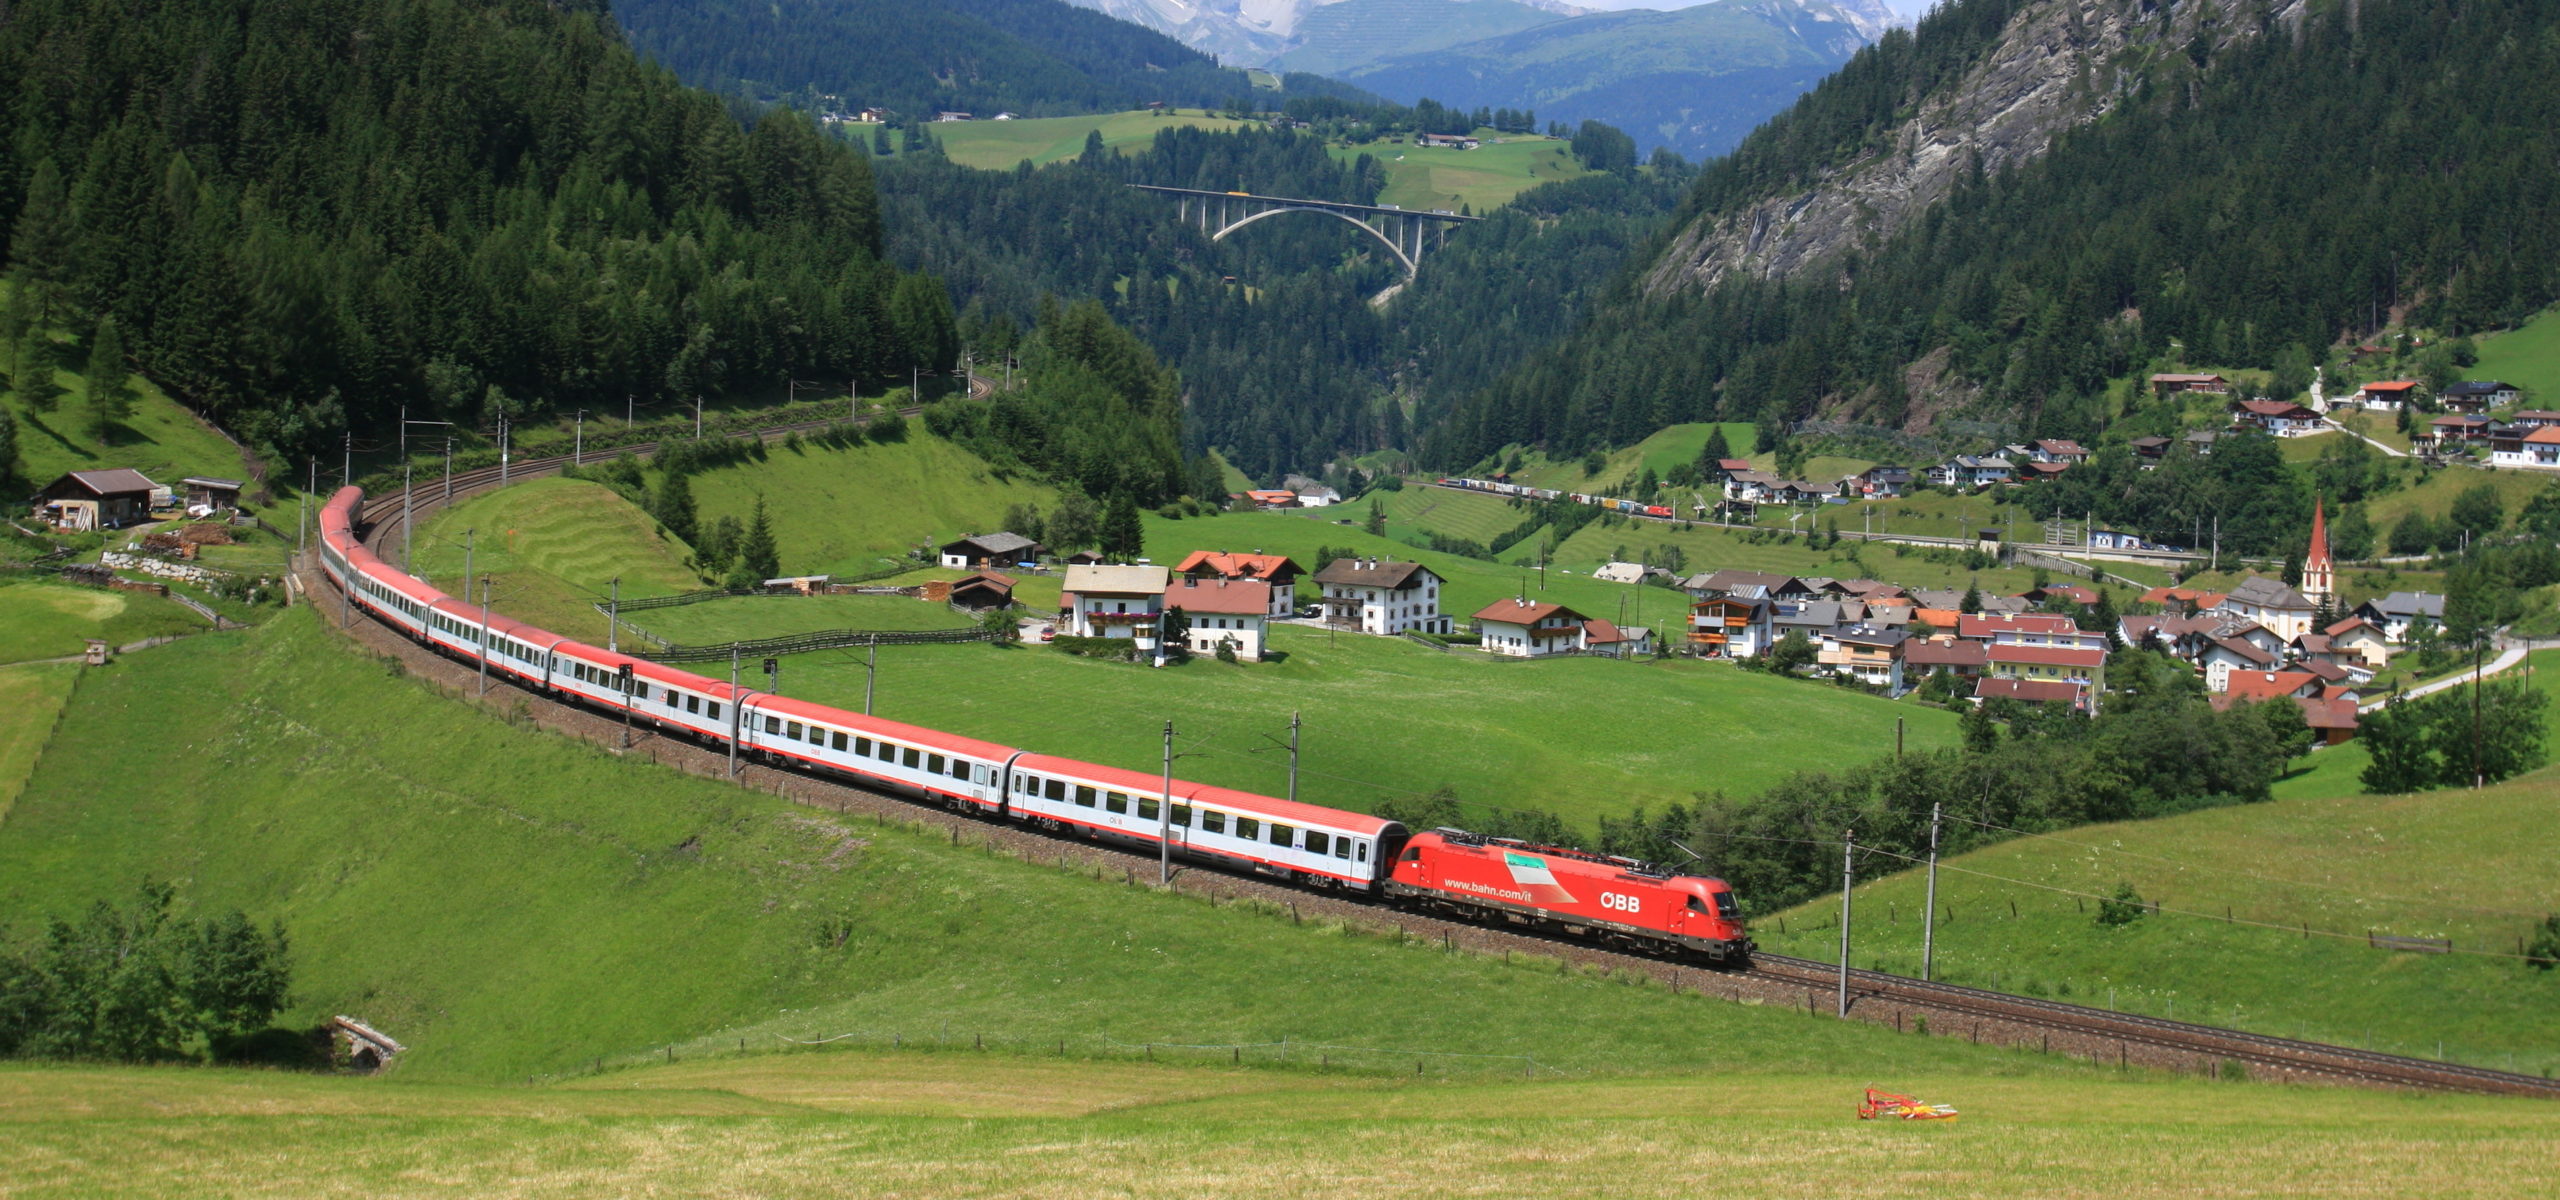 EuroCity between Germany and Italy